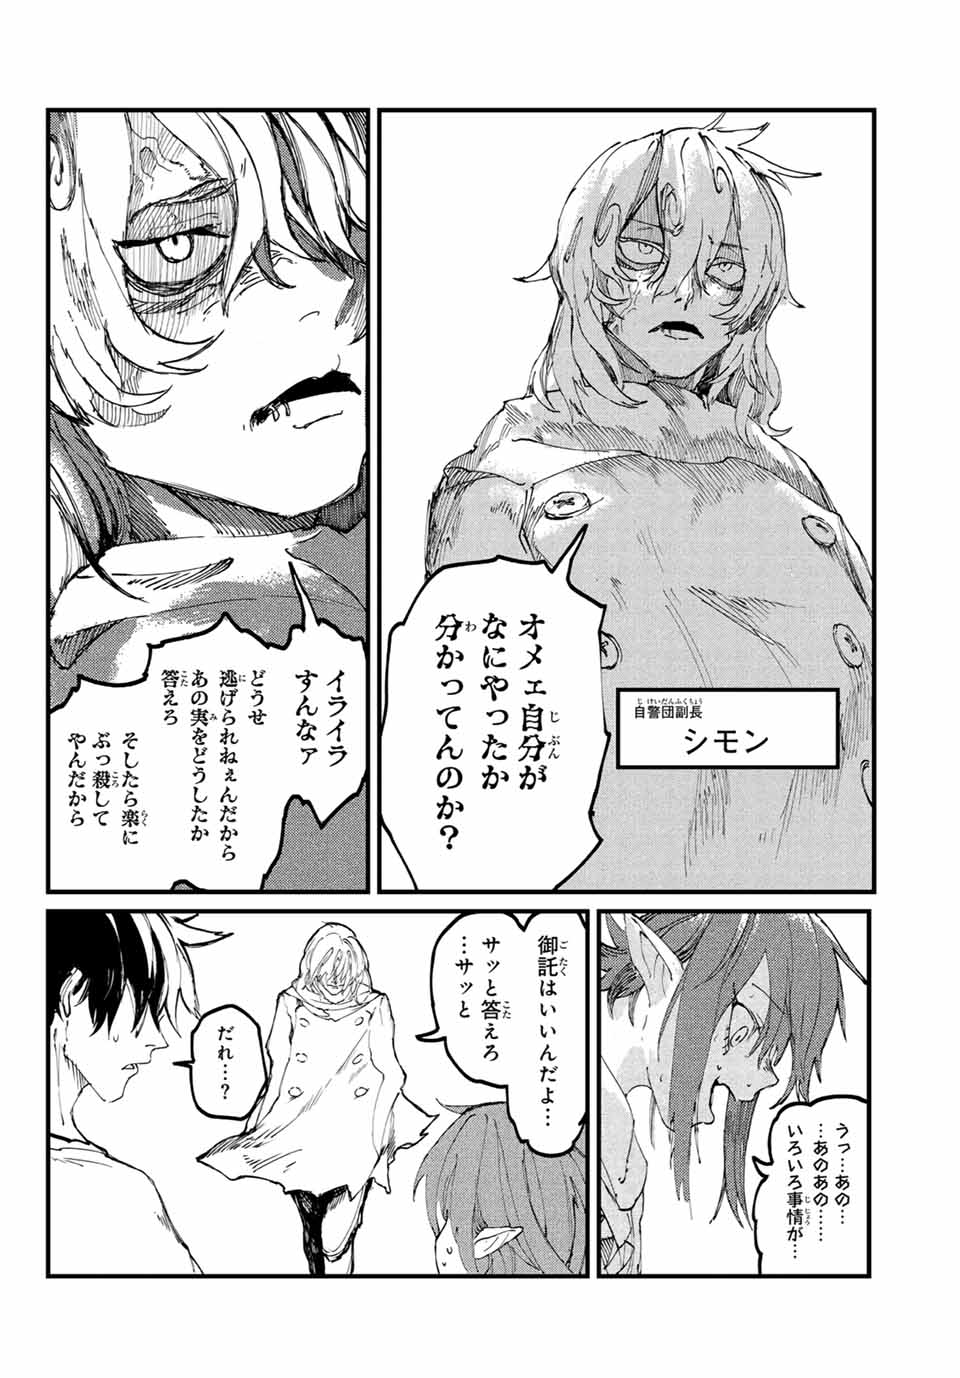 MAN OF RUST 第3話 - Page 30